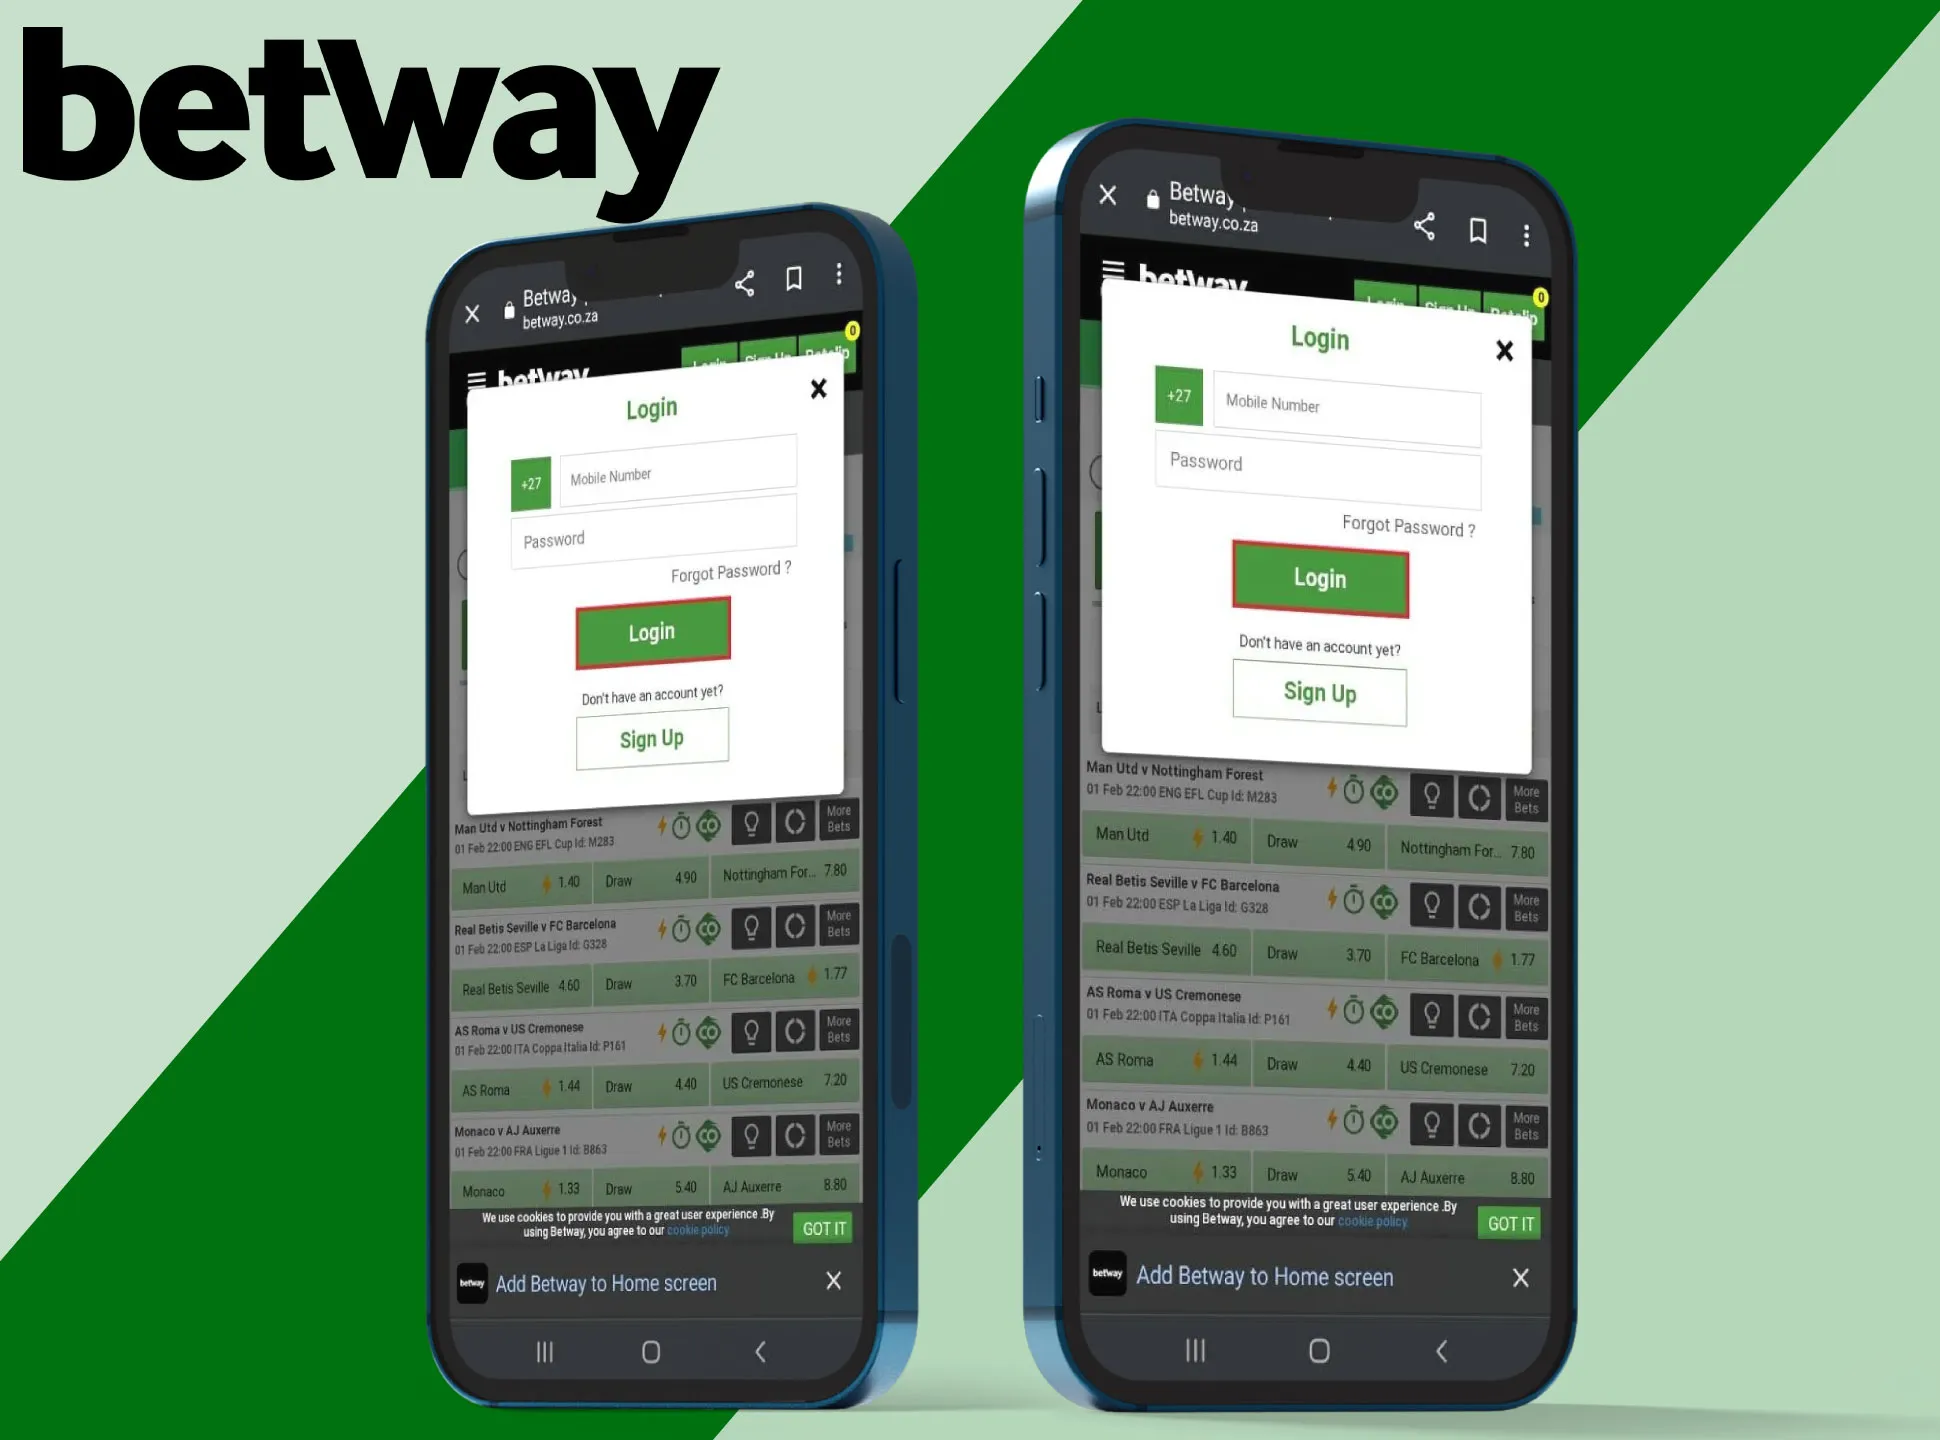 You should use your username and password to log in to Betway.